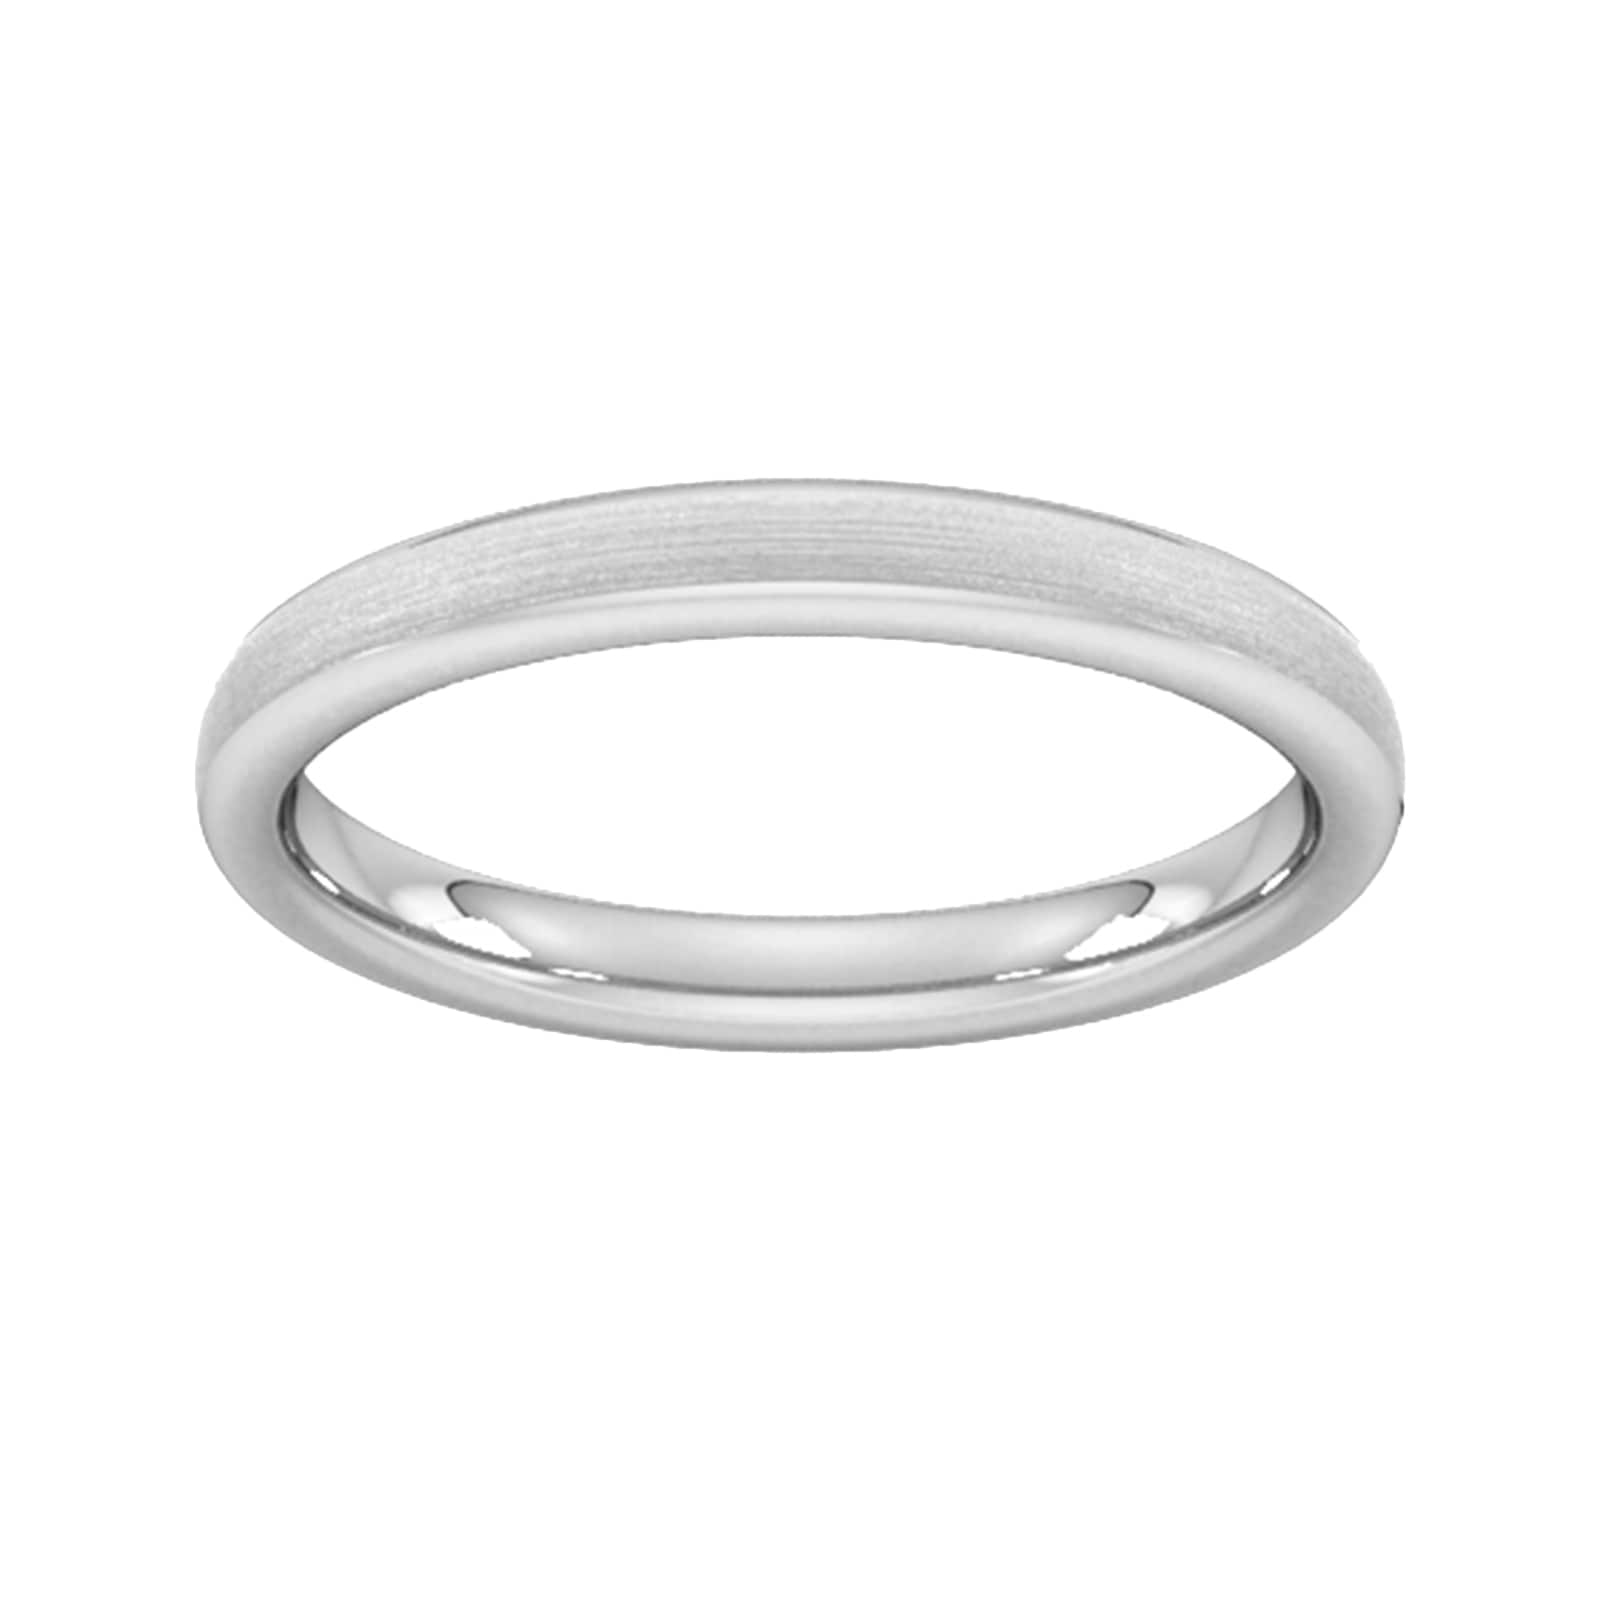 2.5mm Slight Court Extra Heavy Matt Finished Wedding Ring In 9 Carat White Gold - Ring Size T